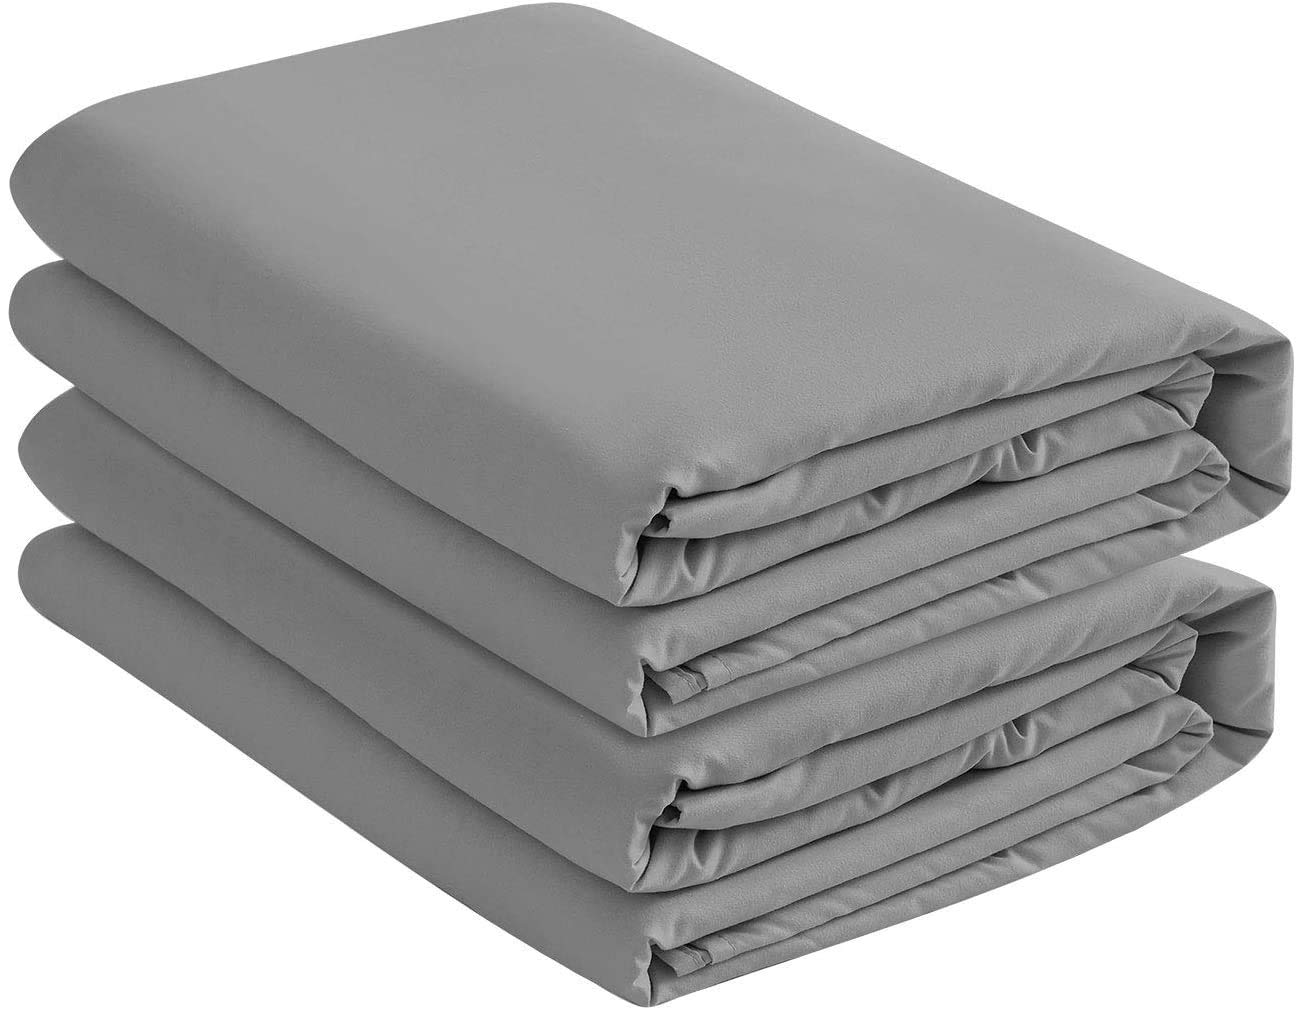 Micro Fiber 2 Full XL Fitted Bed Sheets (2-Pack) Soft and Comfy - Full Extra Long, 15" Deep Pocket, 39" x 80" Great for Extra Long Full Size Beds (Twin XL, Grey)